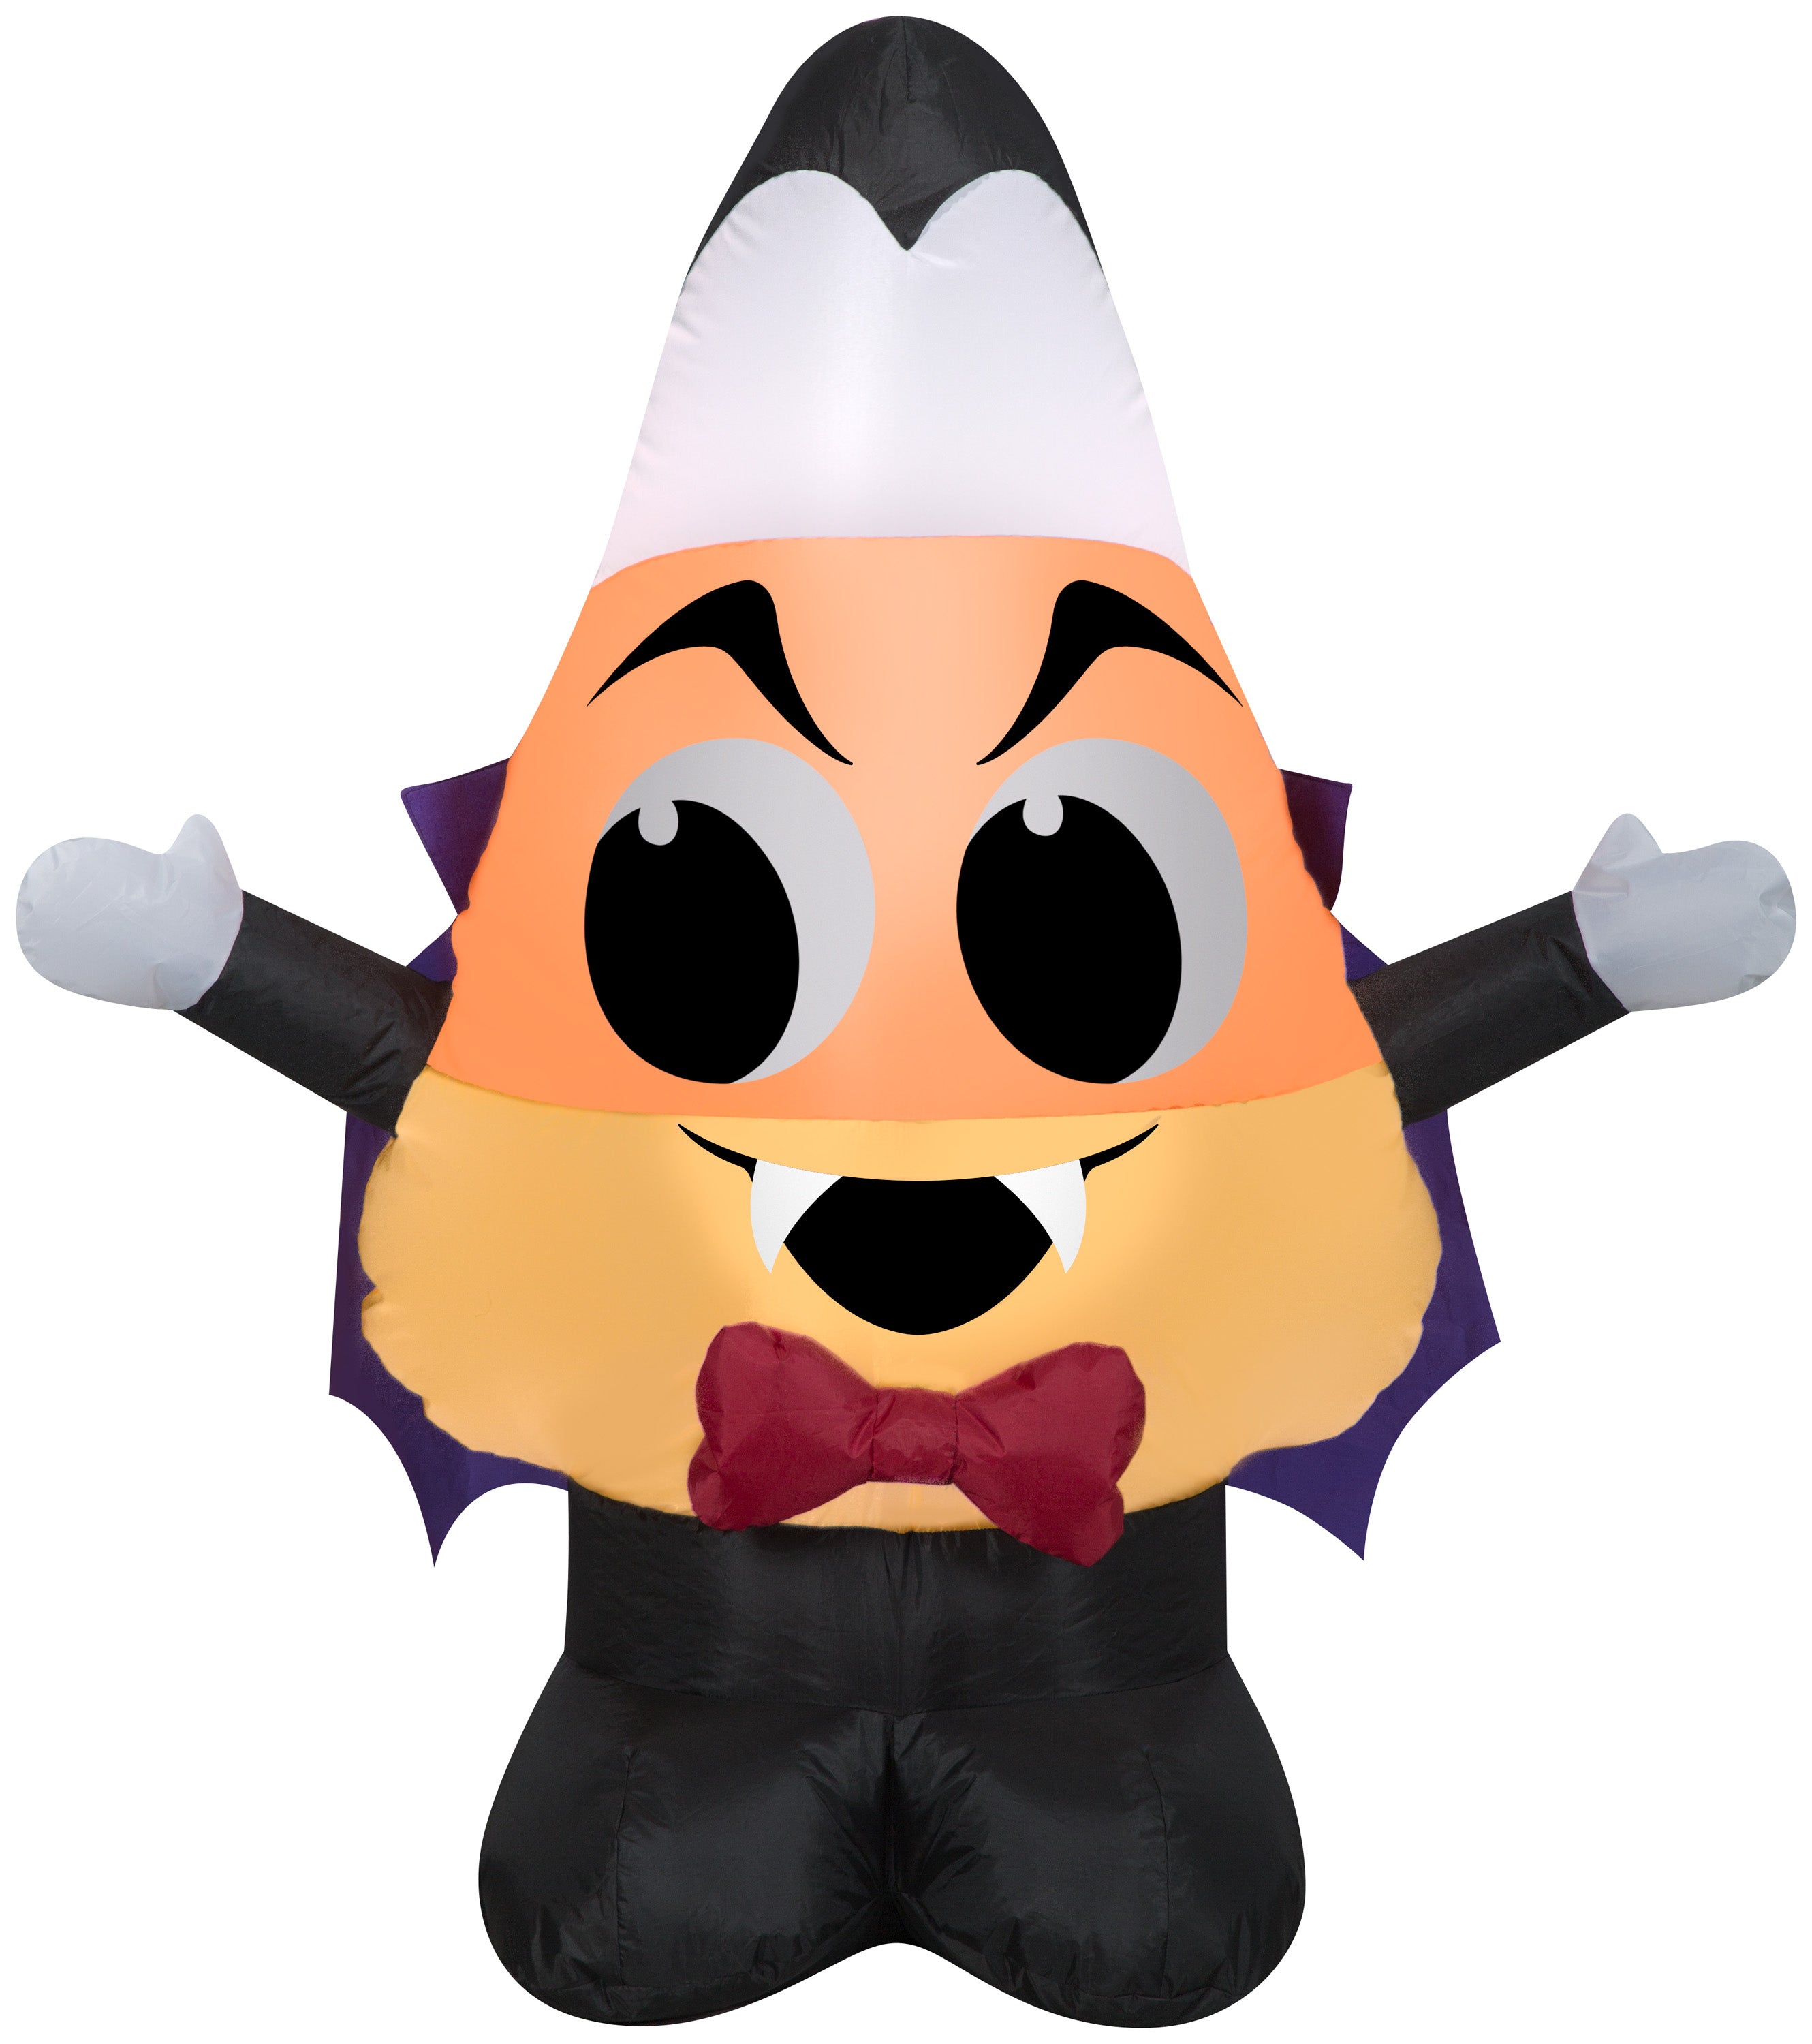 Gemmy Airblown Inflatable Candy Corn Vampire, 3.5 ft Tall, orange